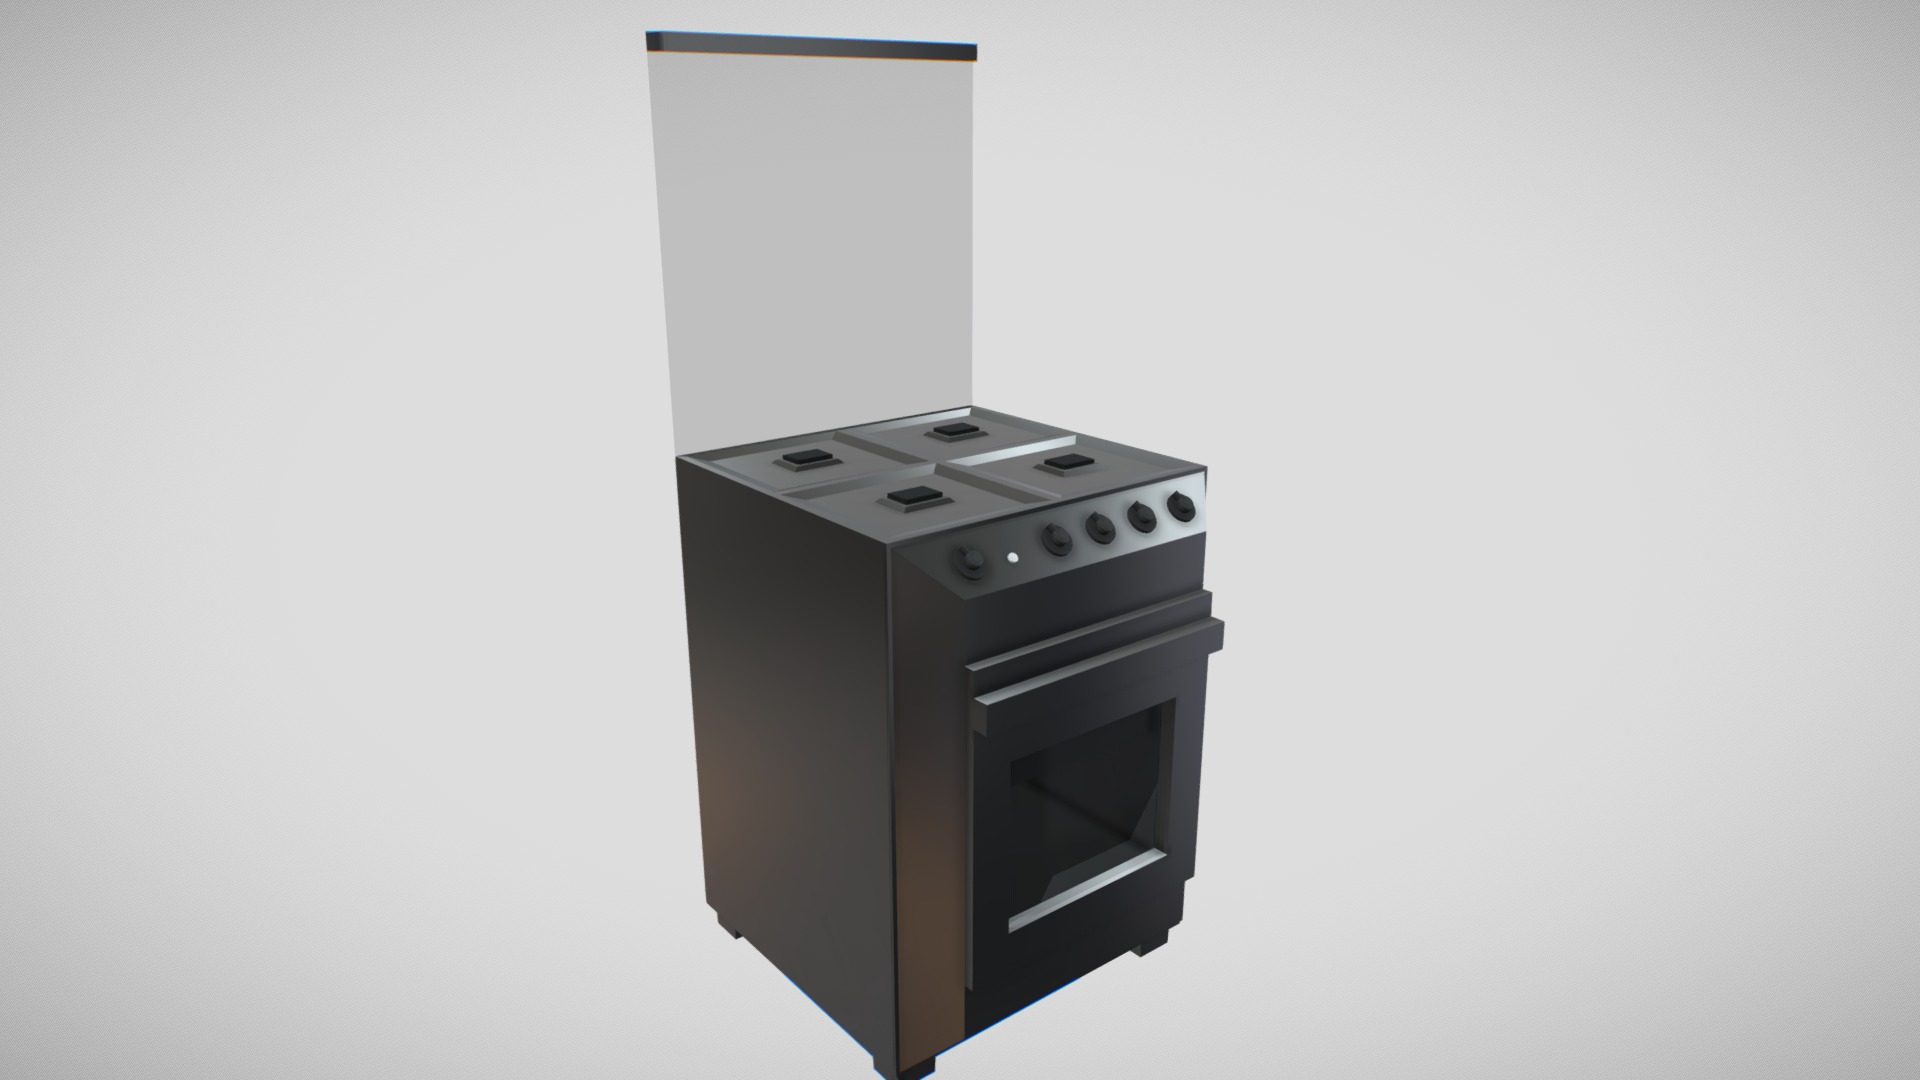 3D model Low Poly Stove - This is a 3D model of the Low Poly Stove. The 3D model is about a black and silver electronic device.